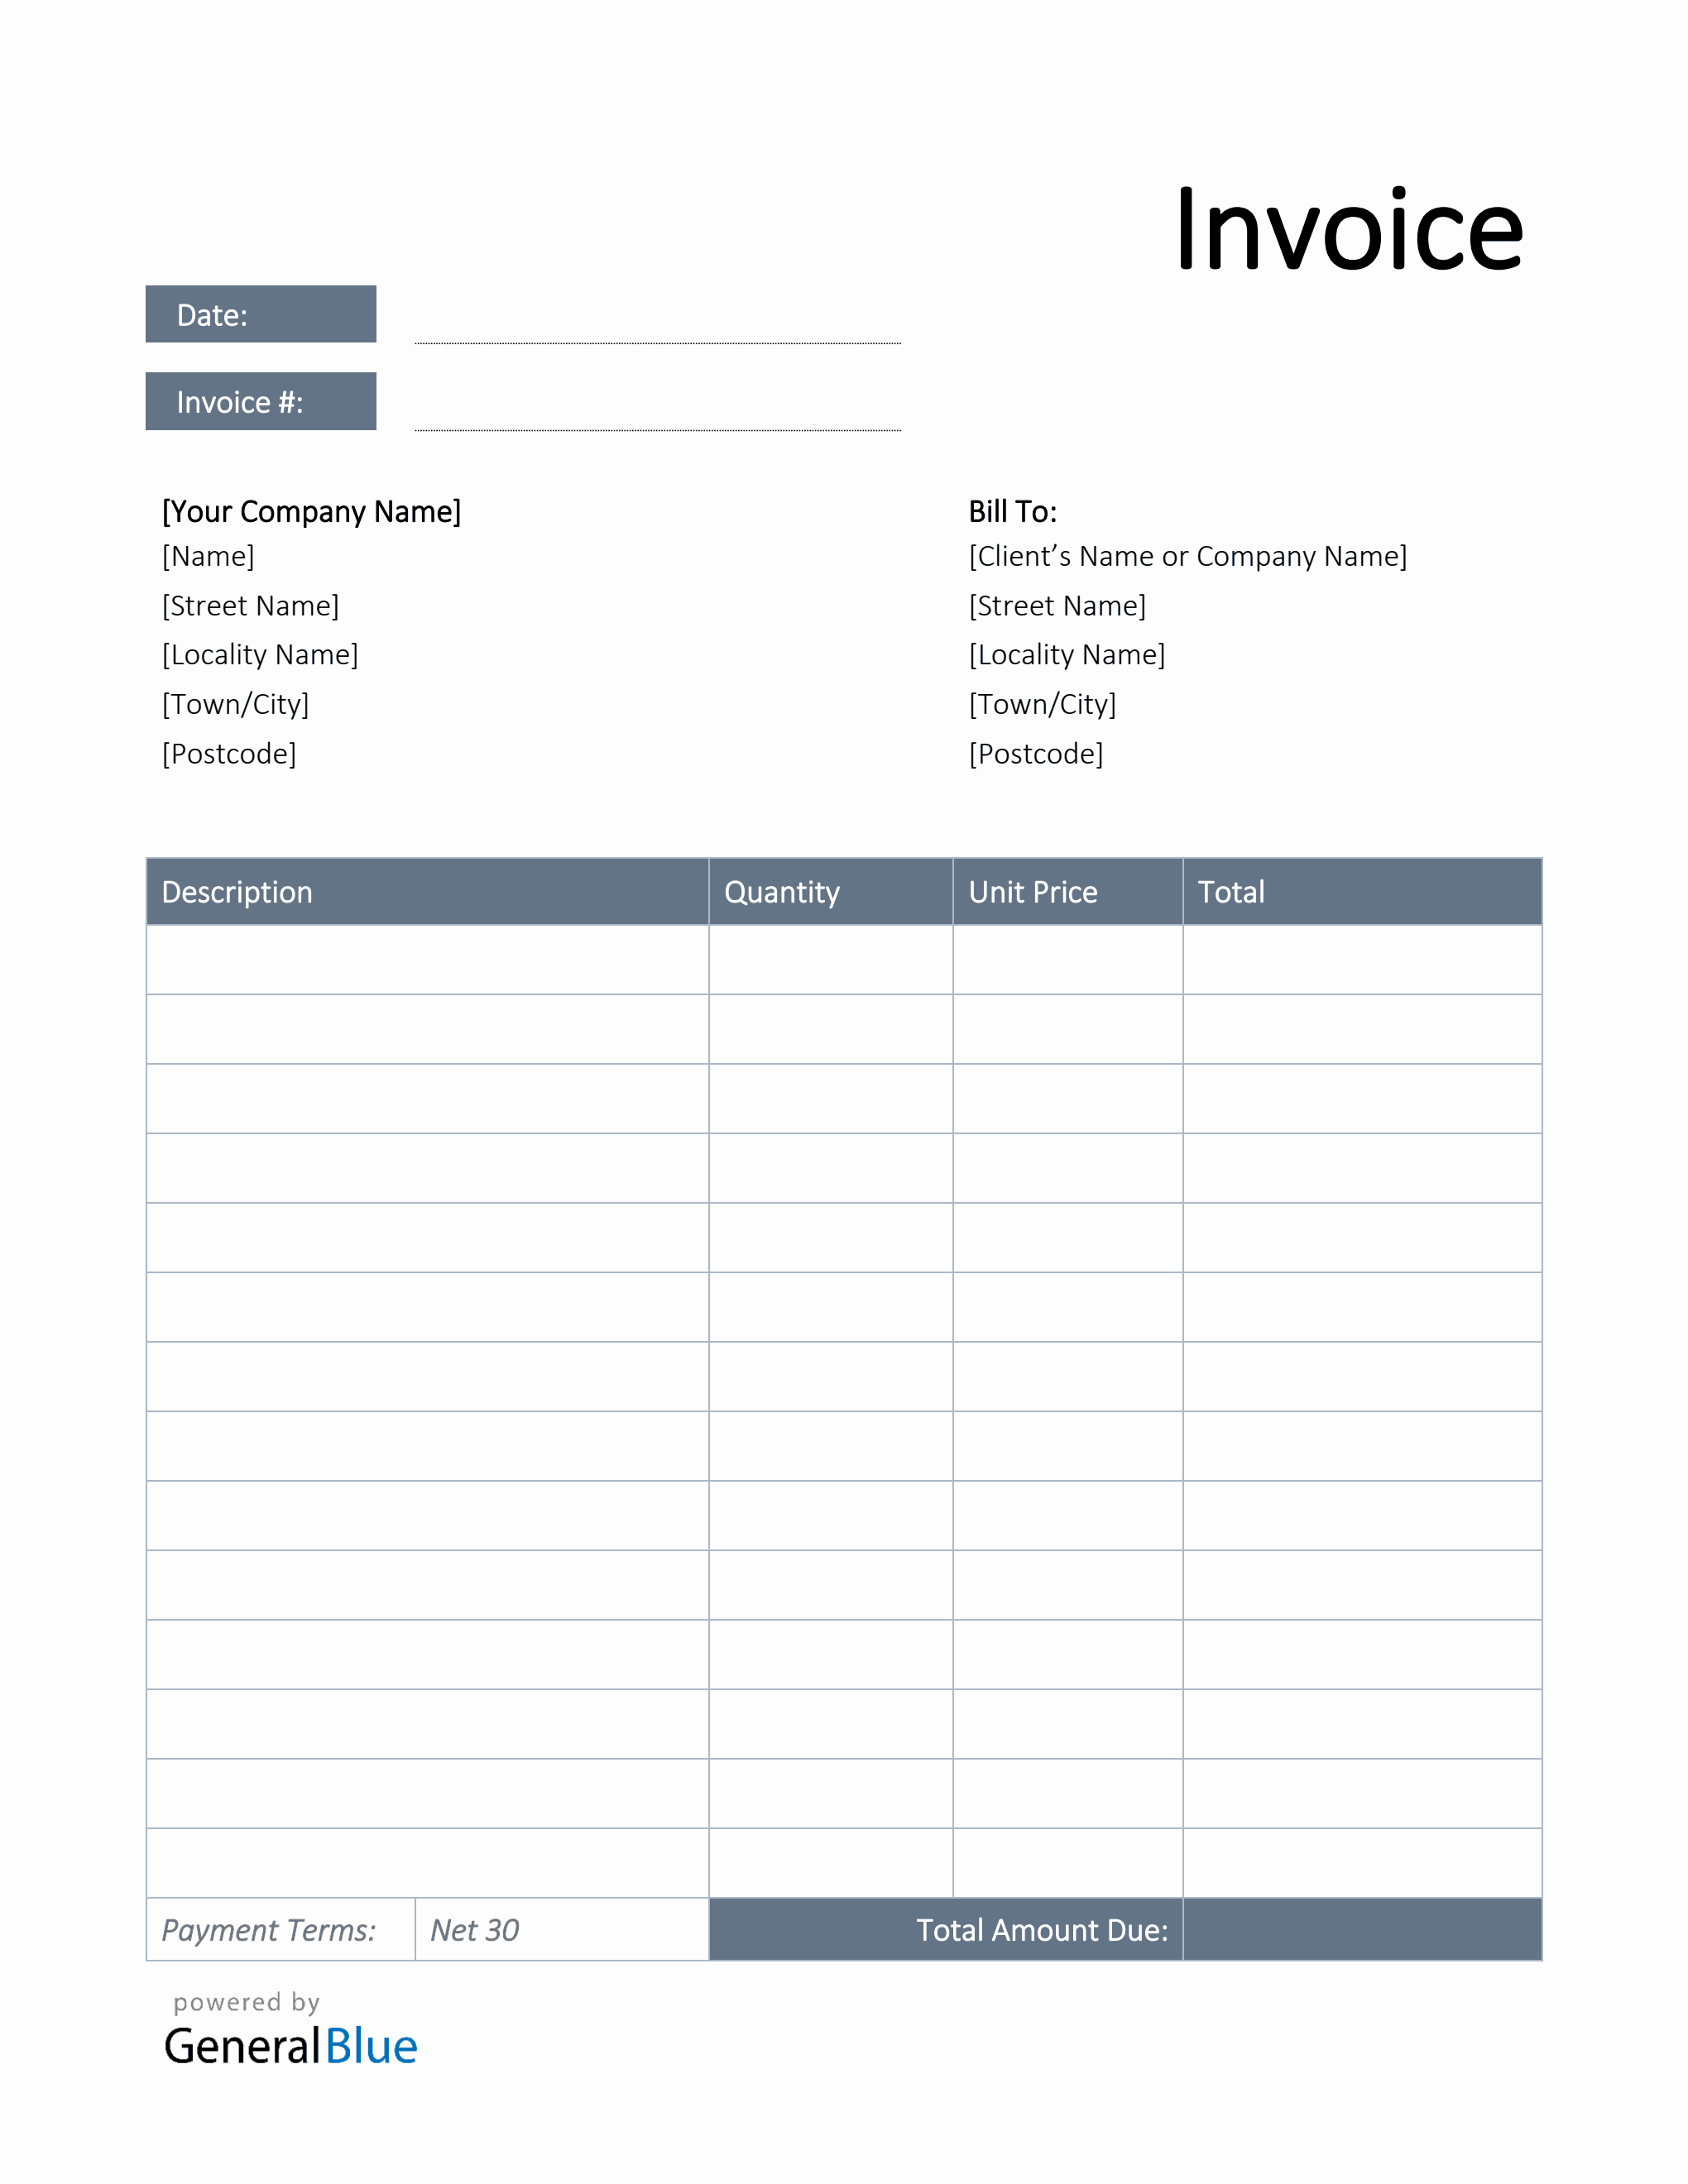 Invoice Template for U.K. in Word (Simple) With Regard To Business Invoice Template Uk